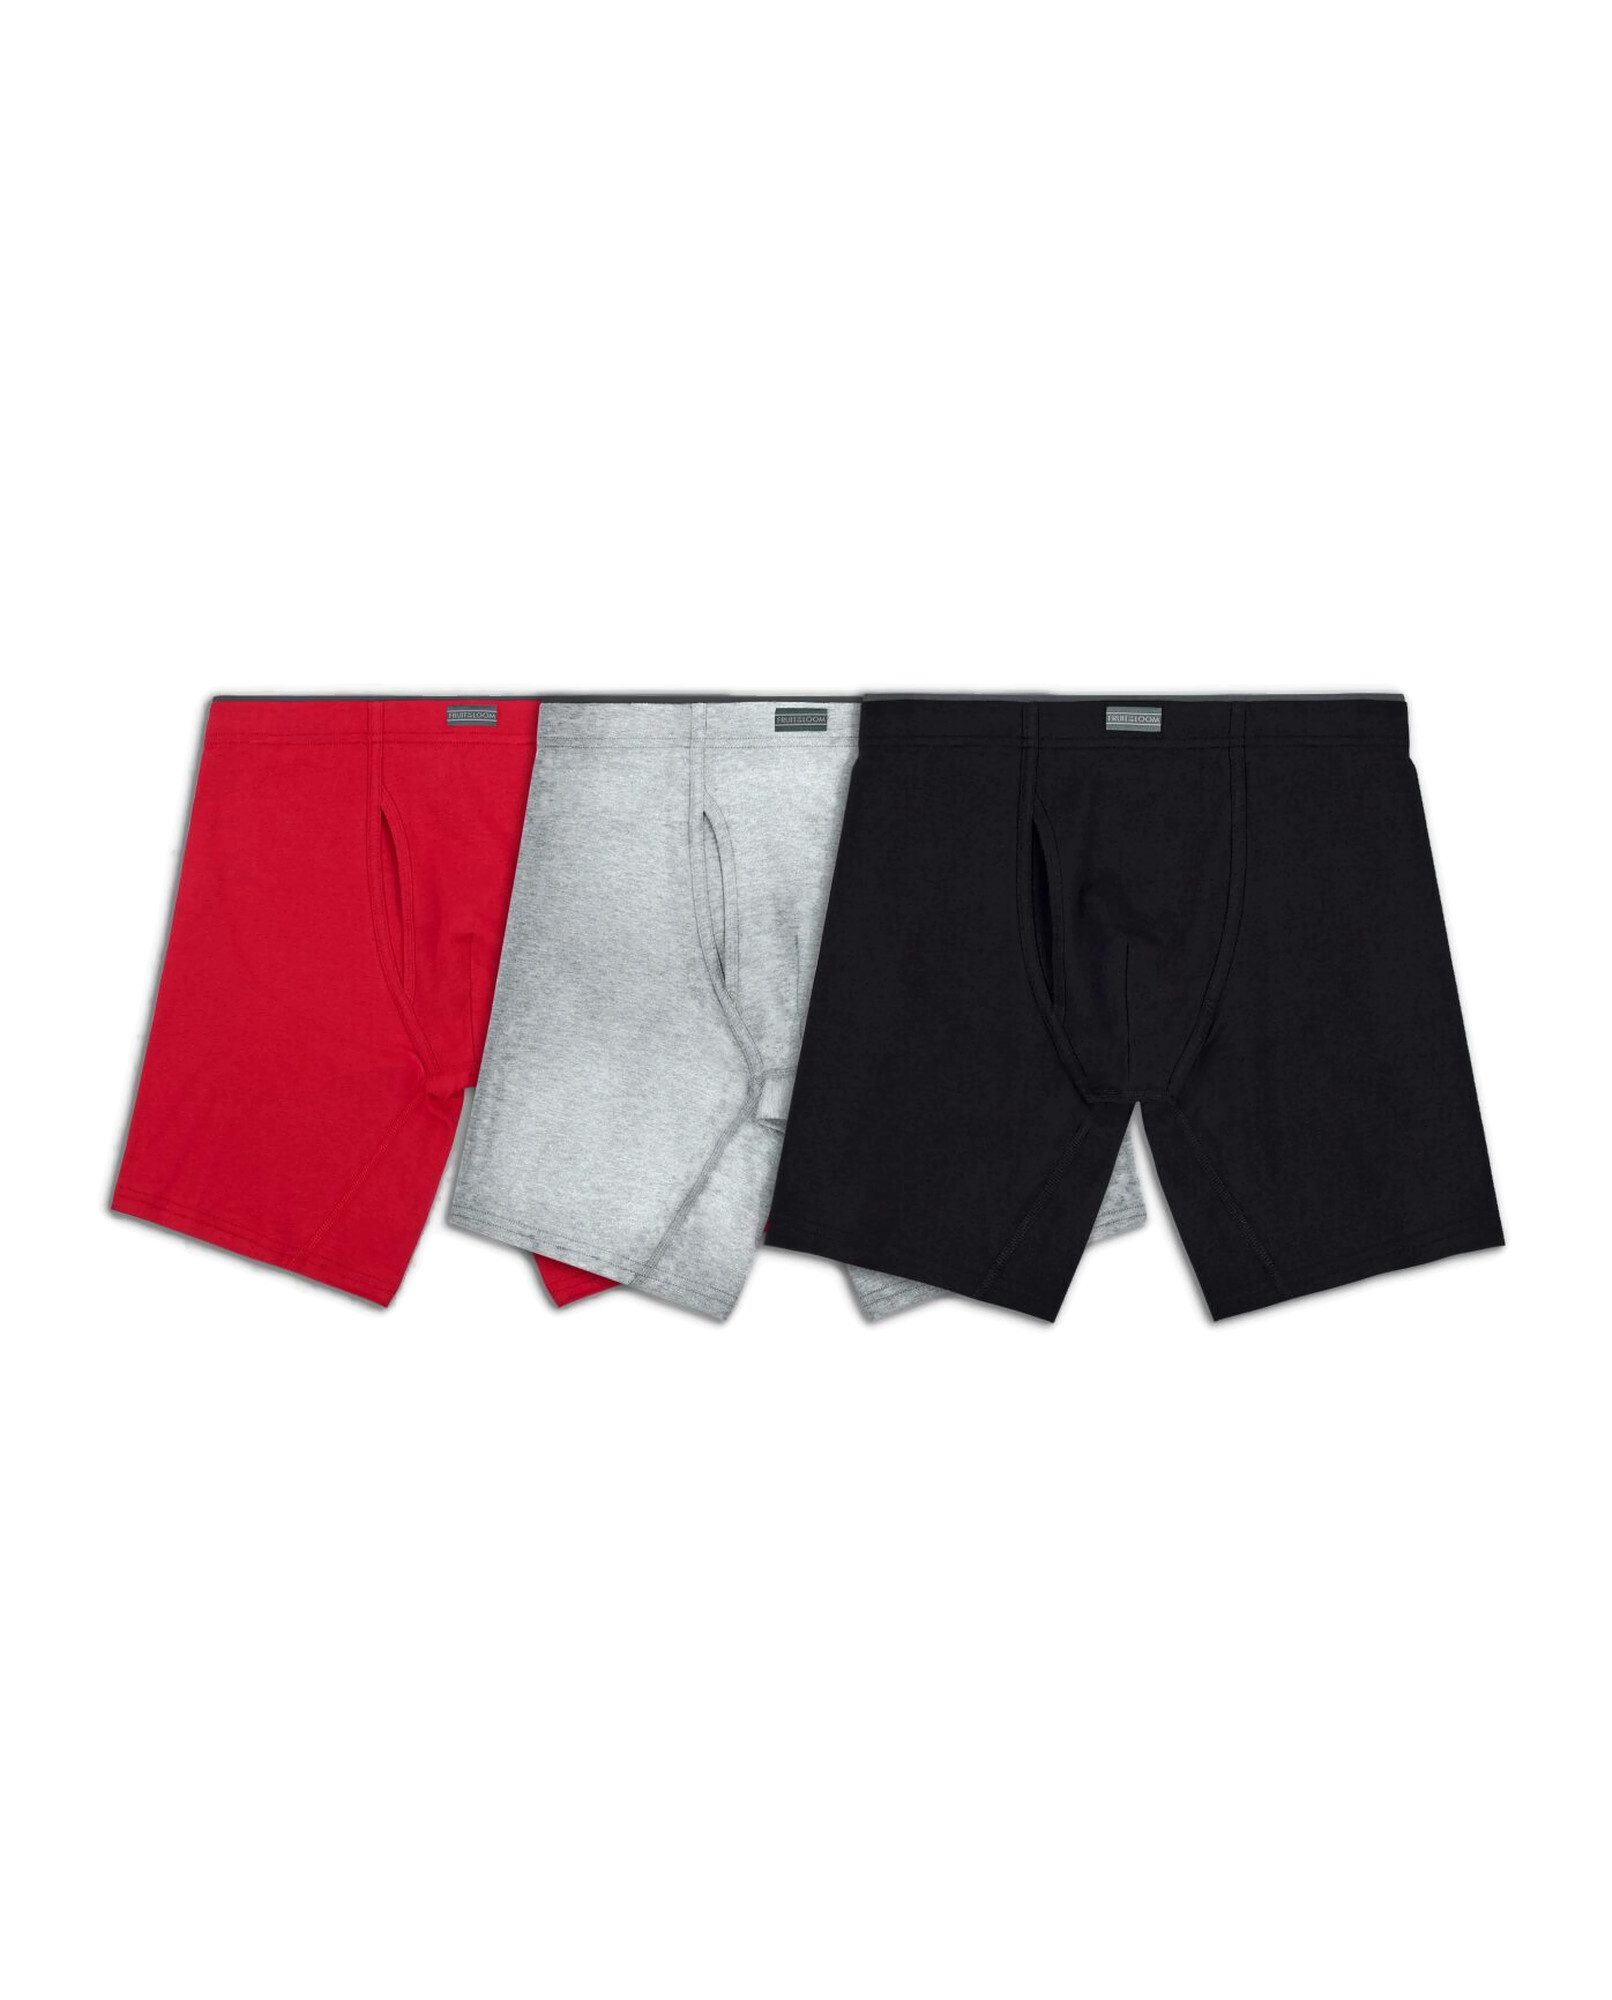 Men's Crafted Comfort™ Fabric Covered Waistband Boxer Briefs, Assorted 3 Pack